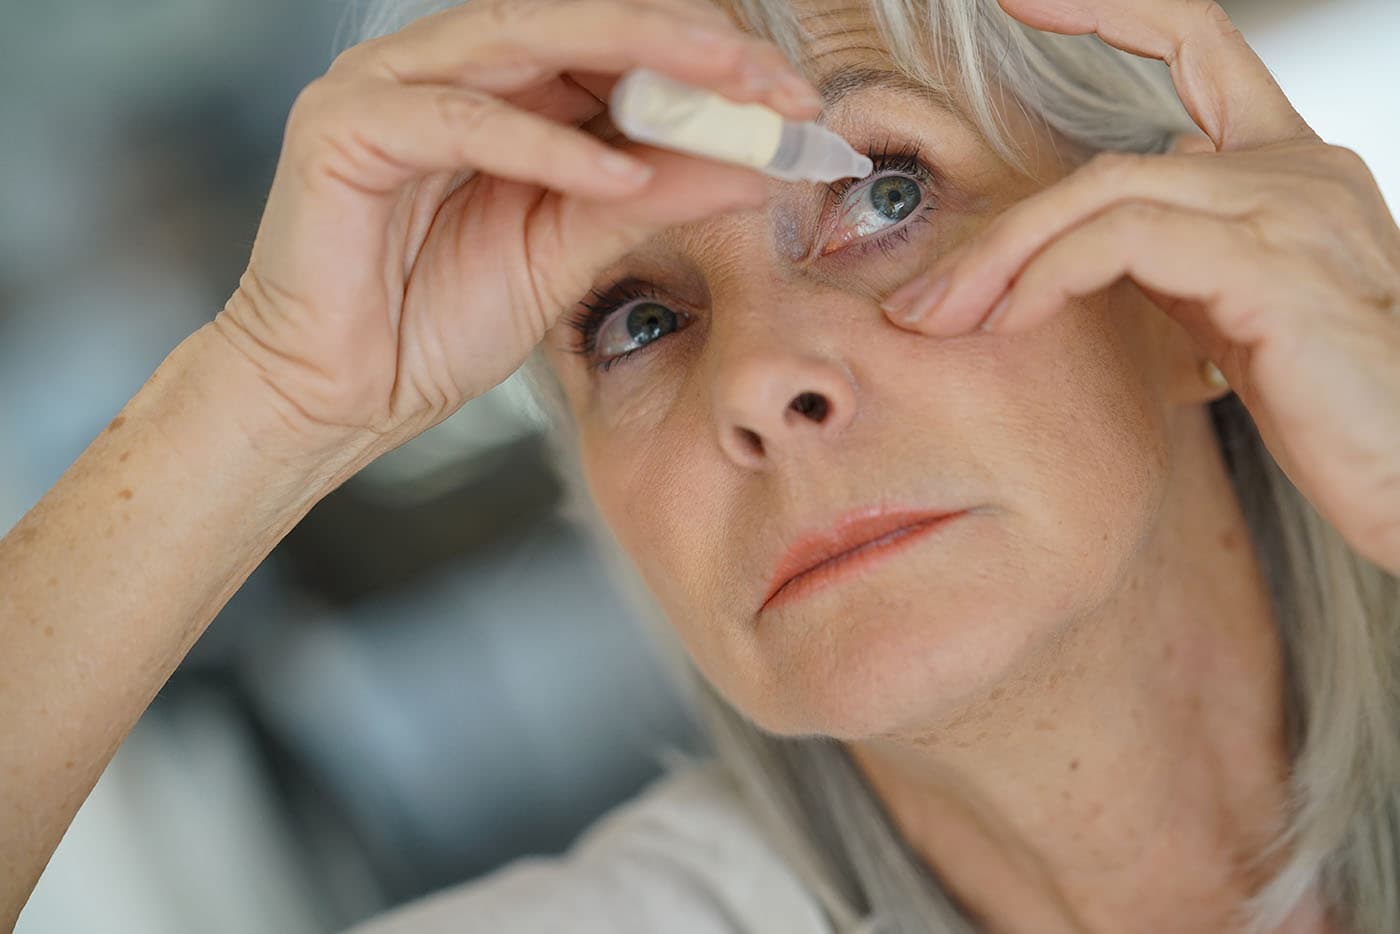 woman placing contact lenses in her eyes